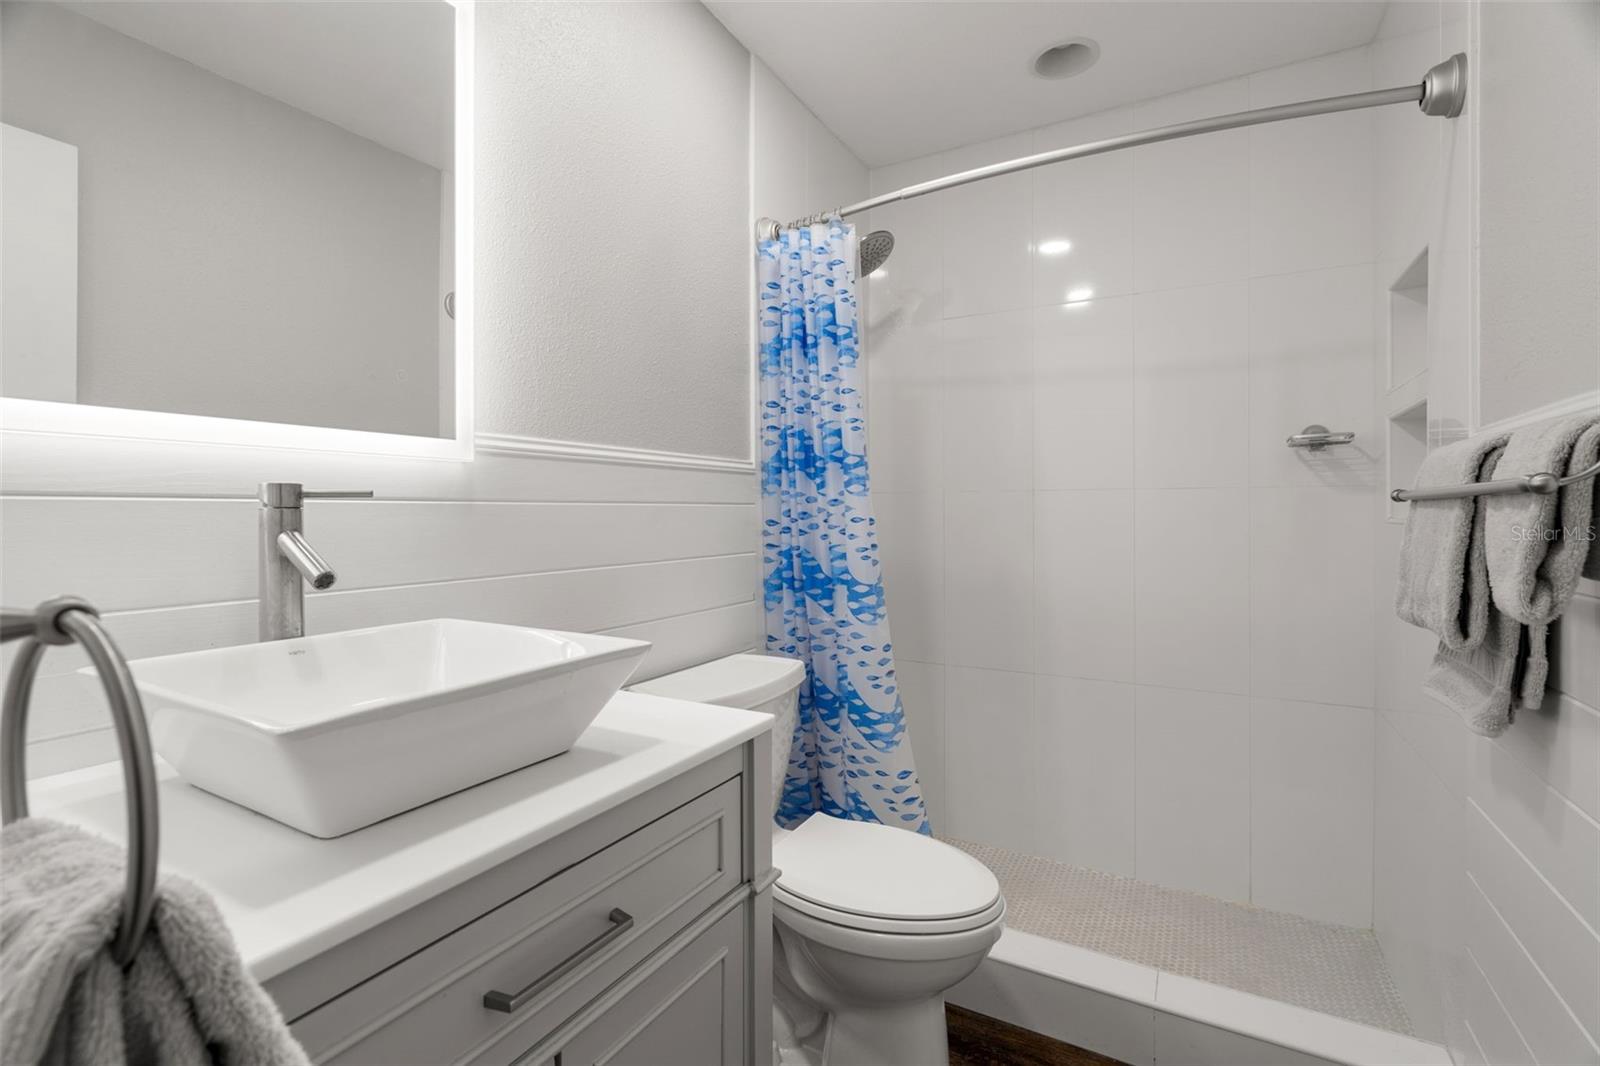 This beautifully updated bathroom is conveniently located just outside the primary bedroom.